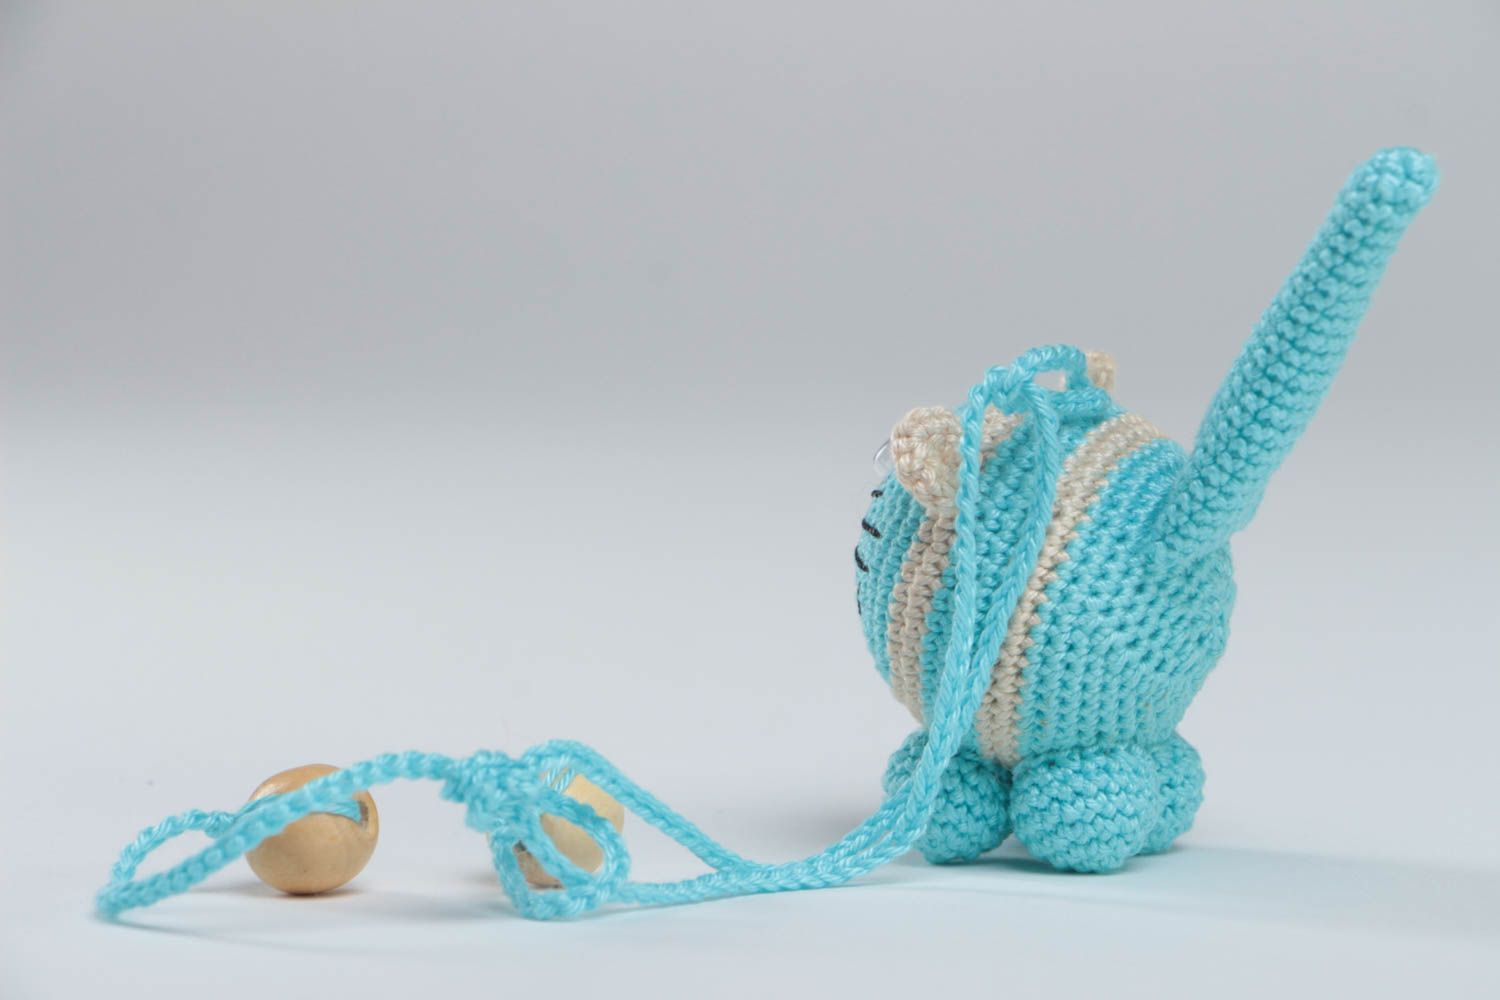 Crocheted cotton rattle small blue cat handmade toy for little children photo 4